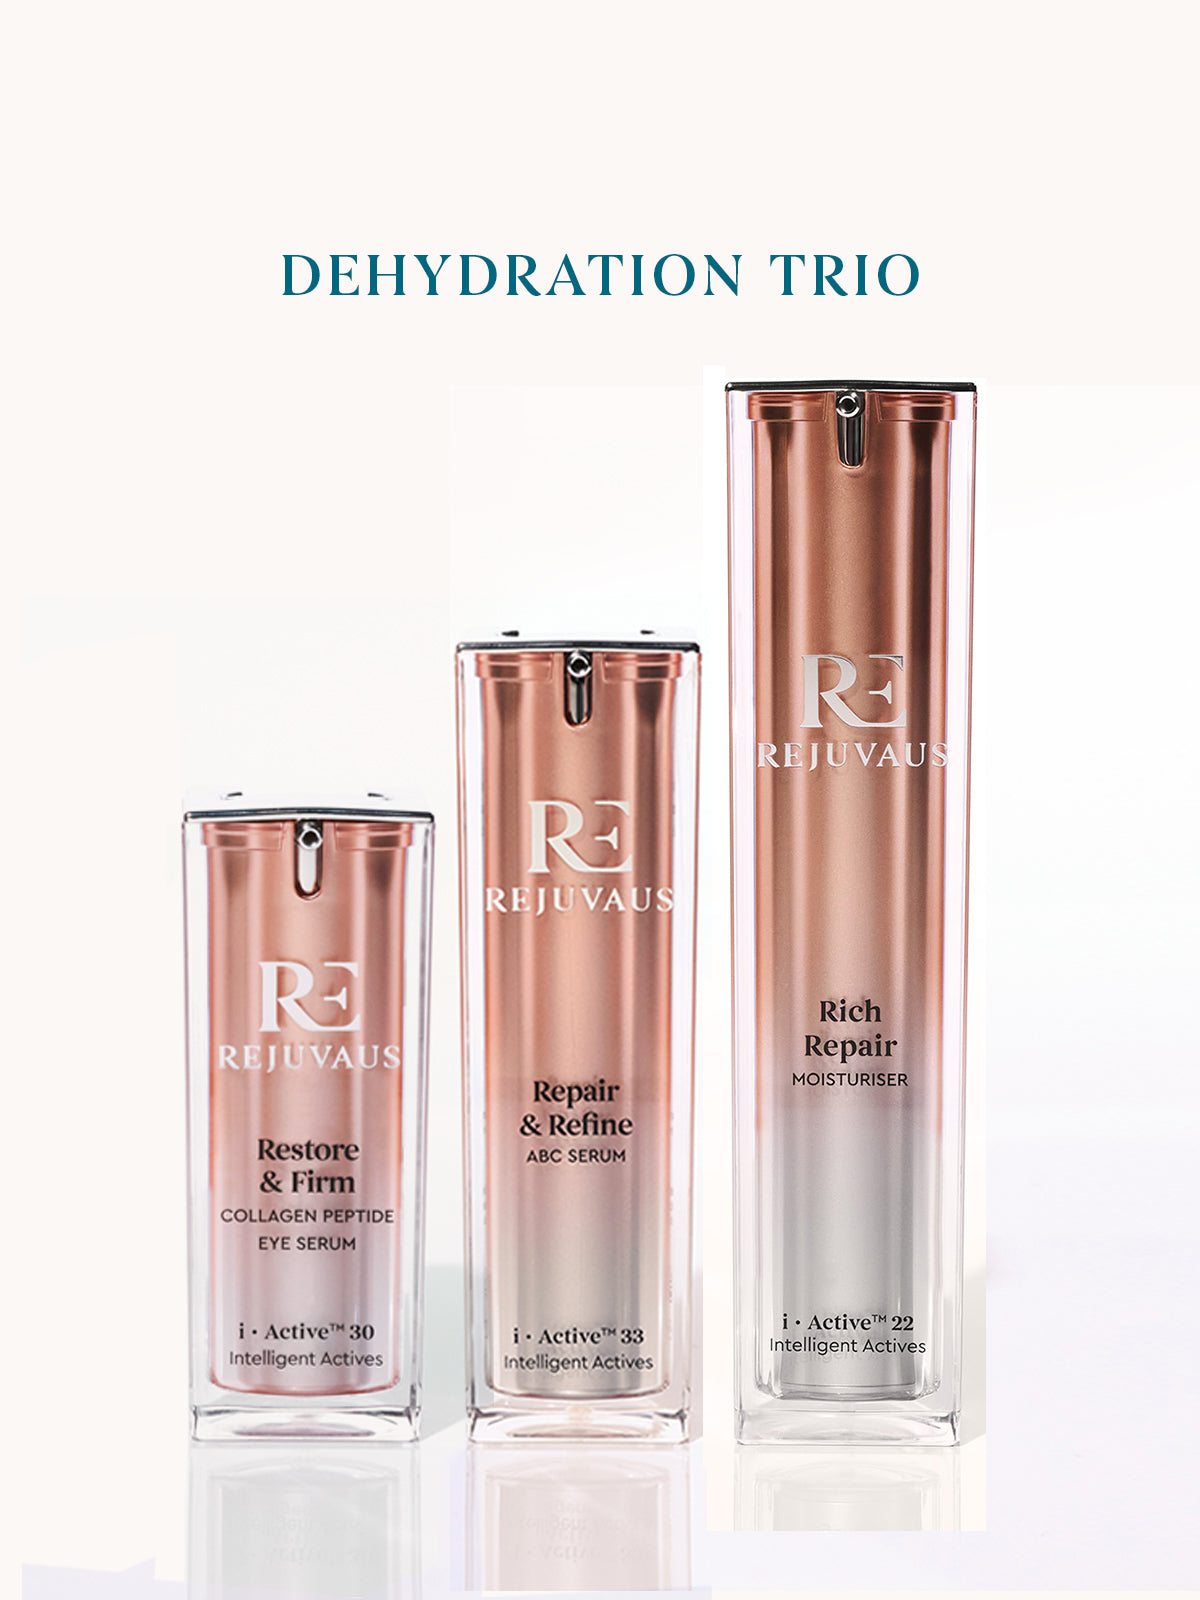 Skincare for dehydrated skin